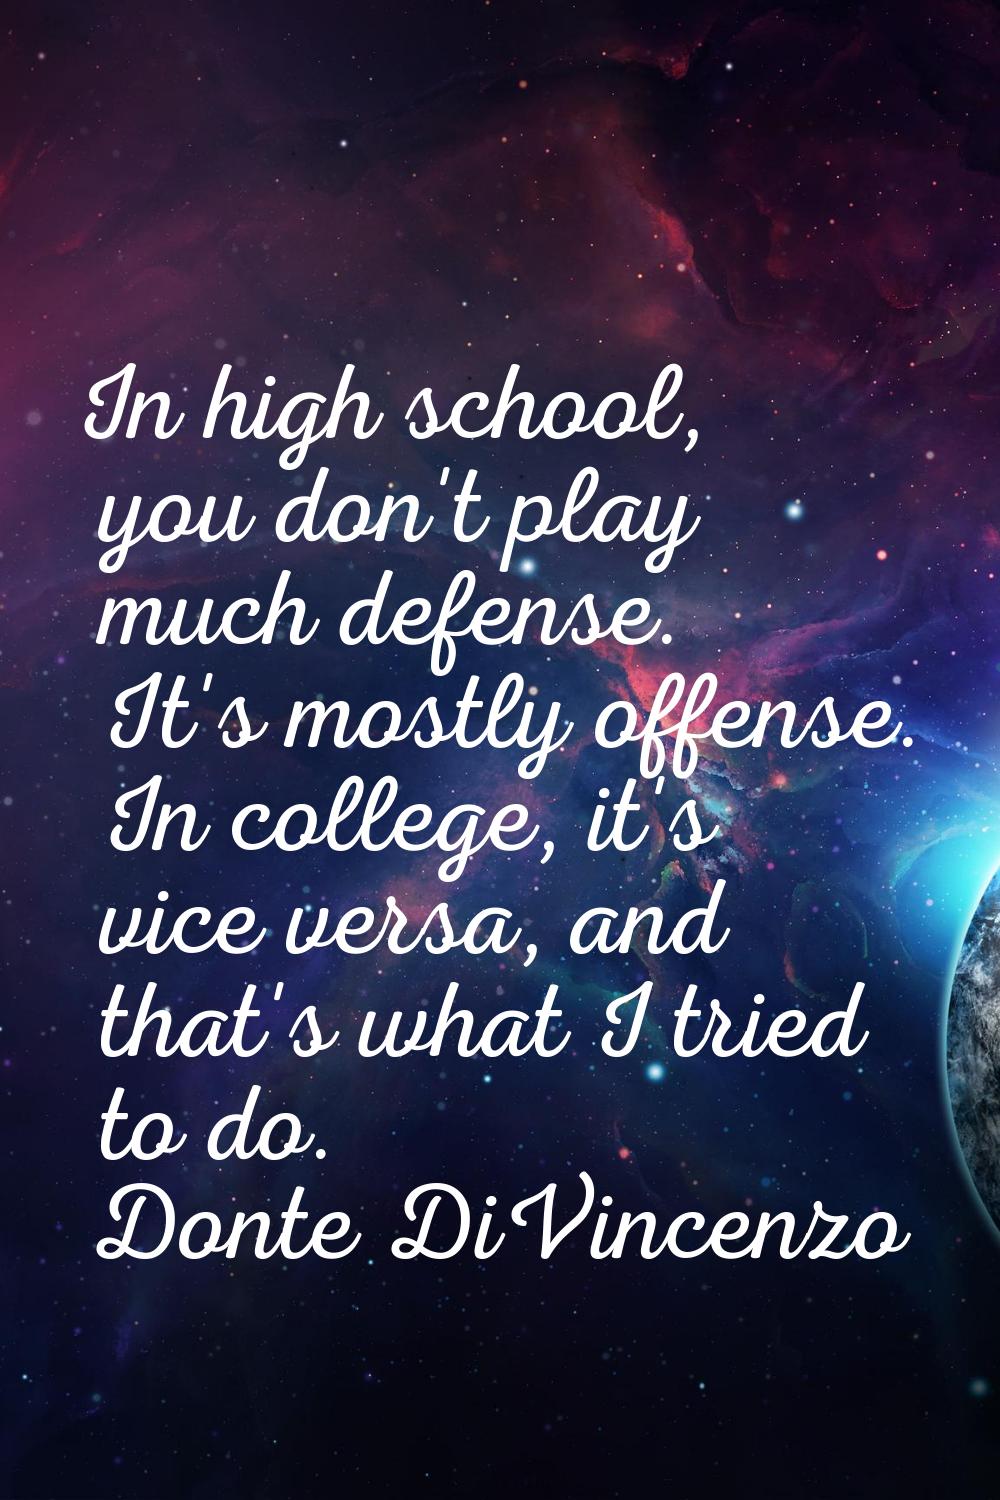 In high school, you don't play much defense. It's mostly offense. In college, it's vice versa, and 